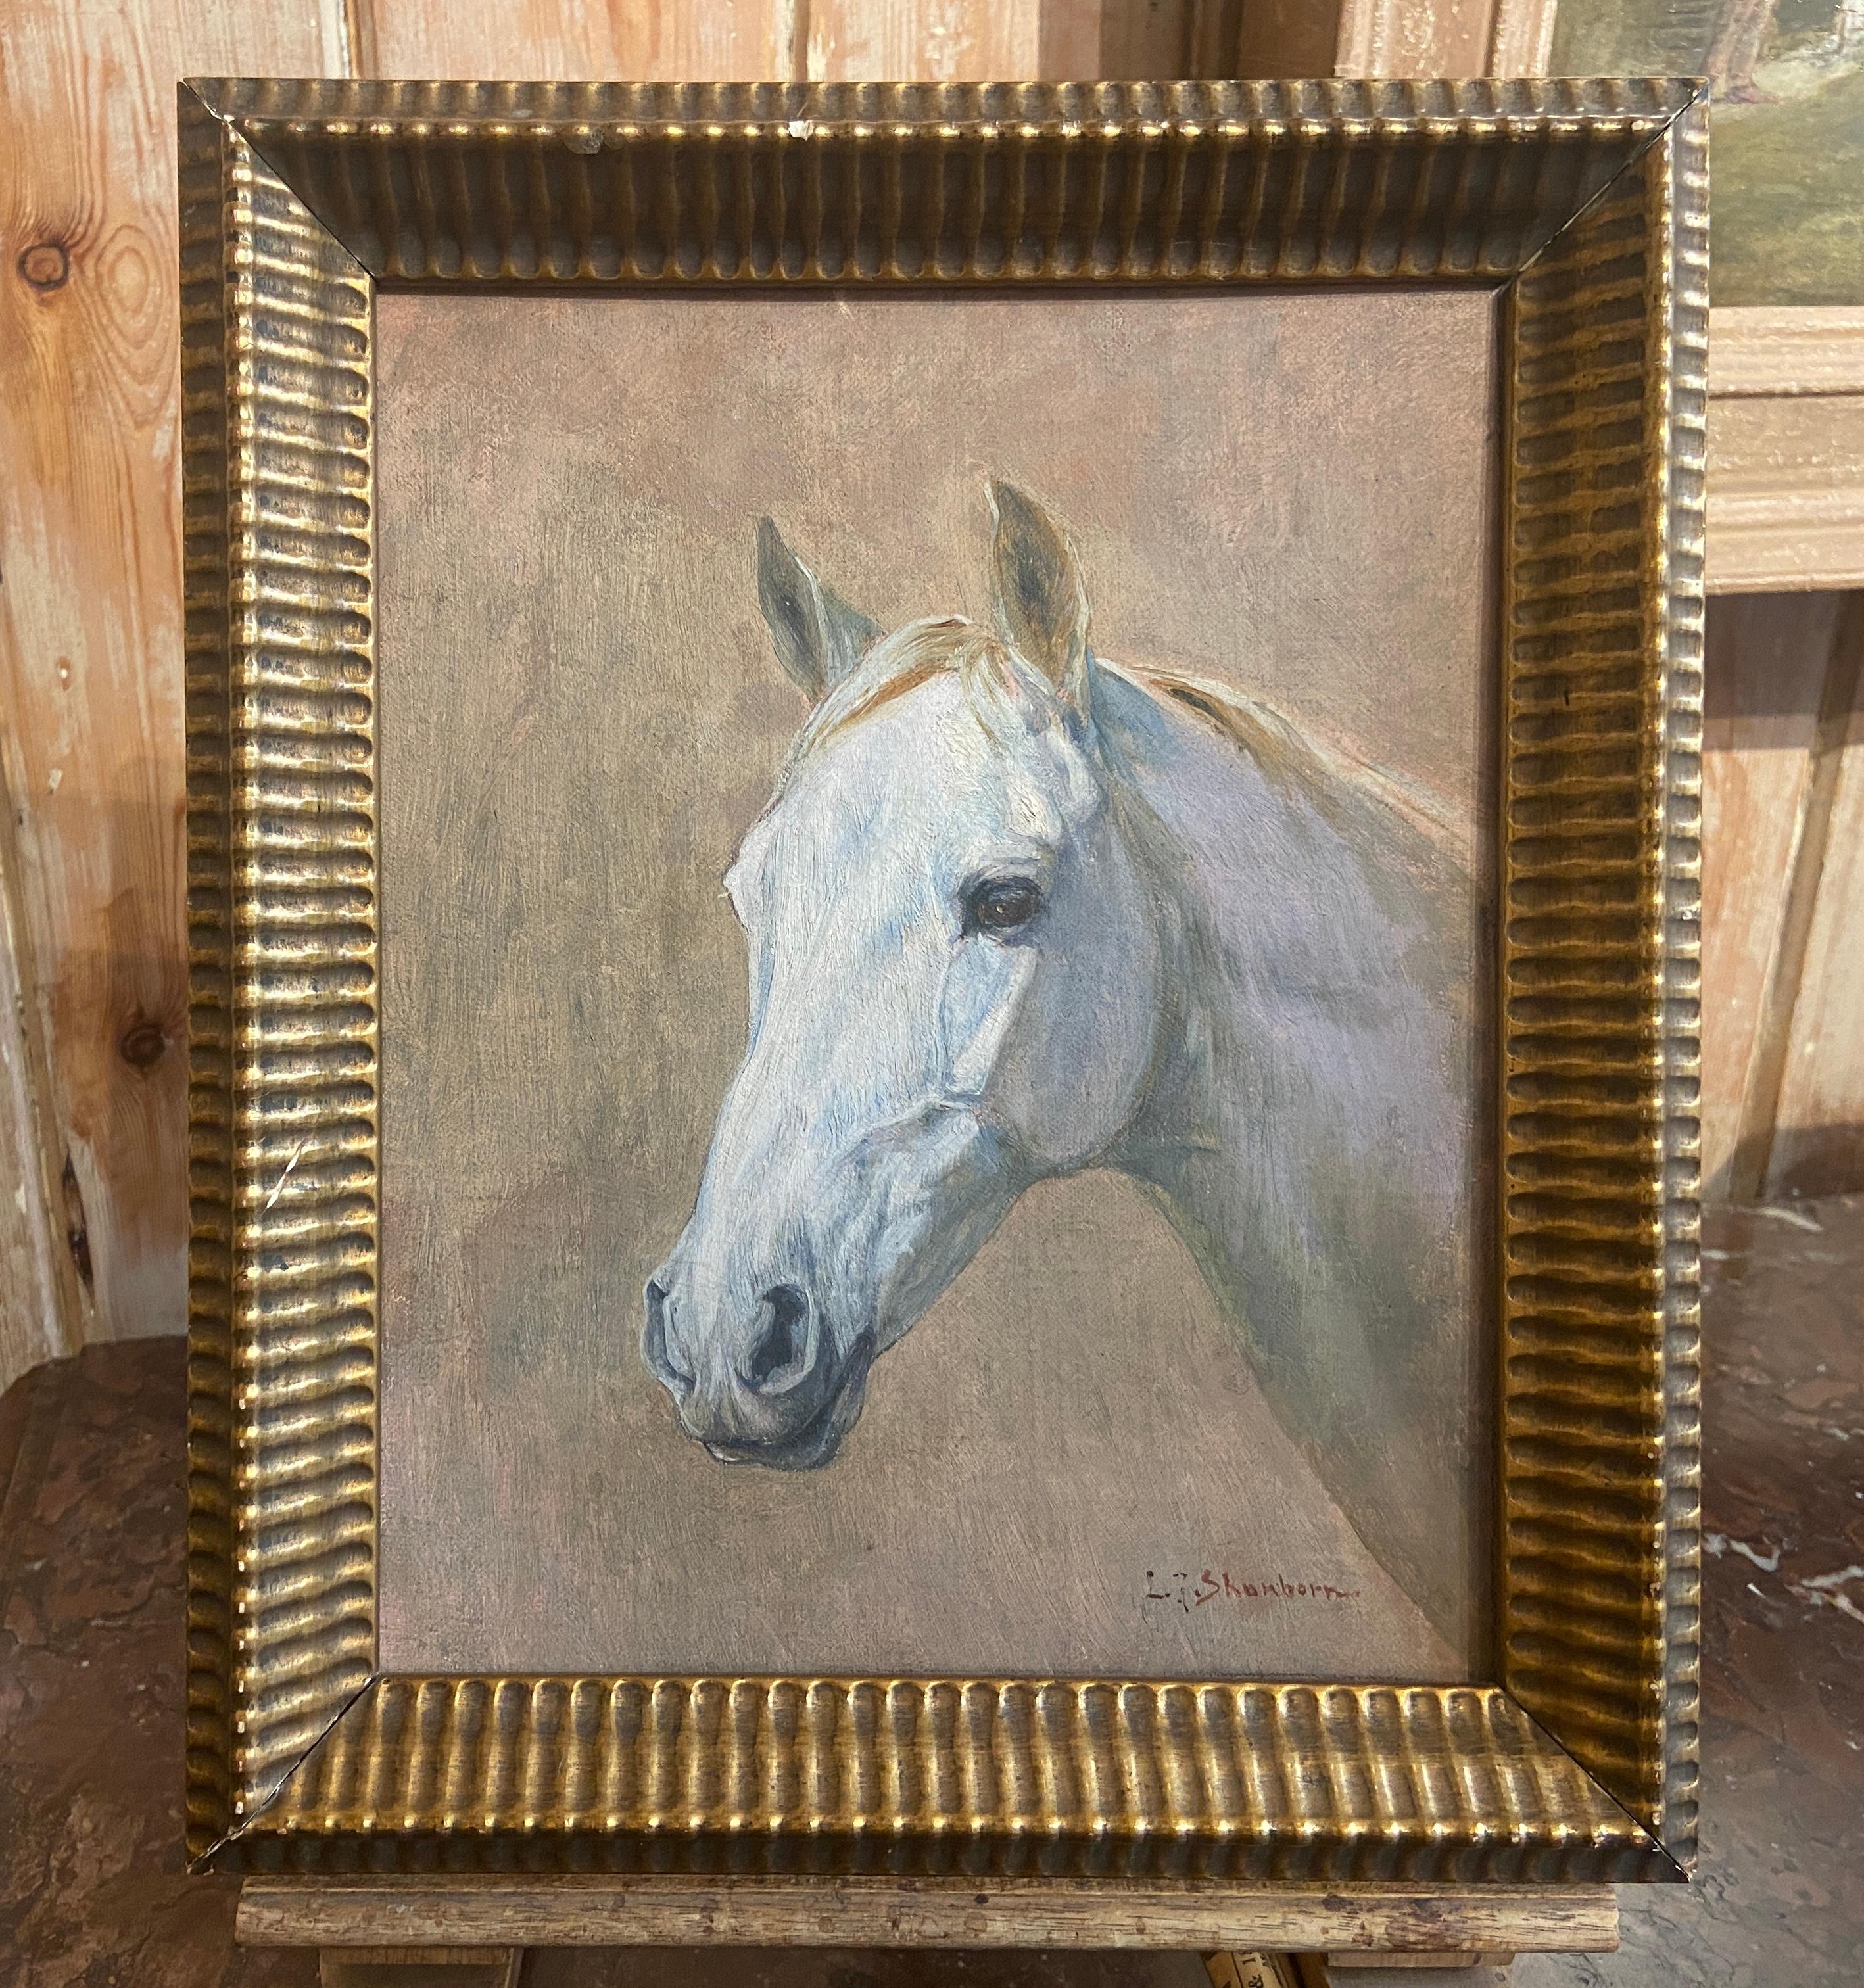 Head of a Arab Horse - Painting by John Lewis Shonborn